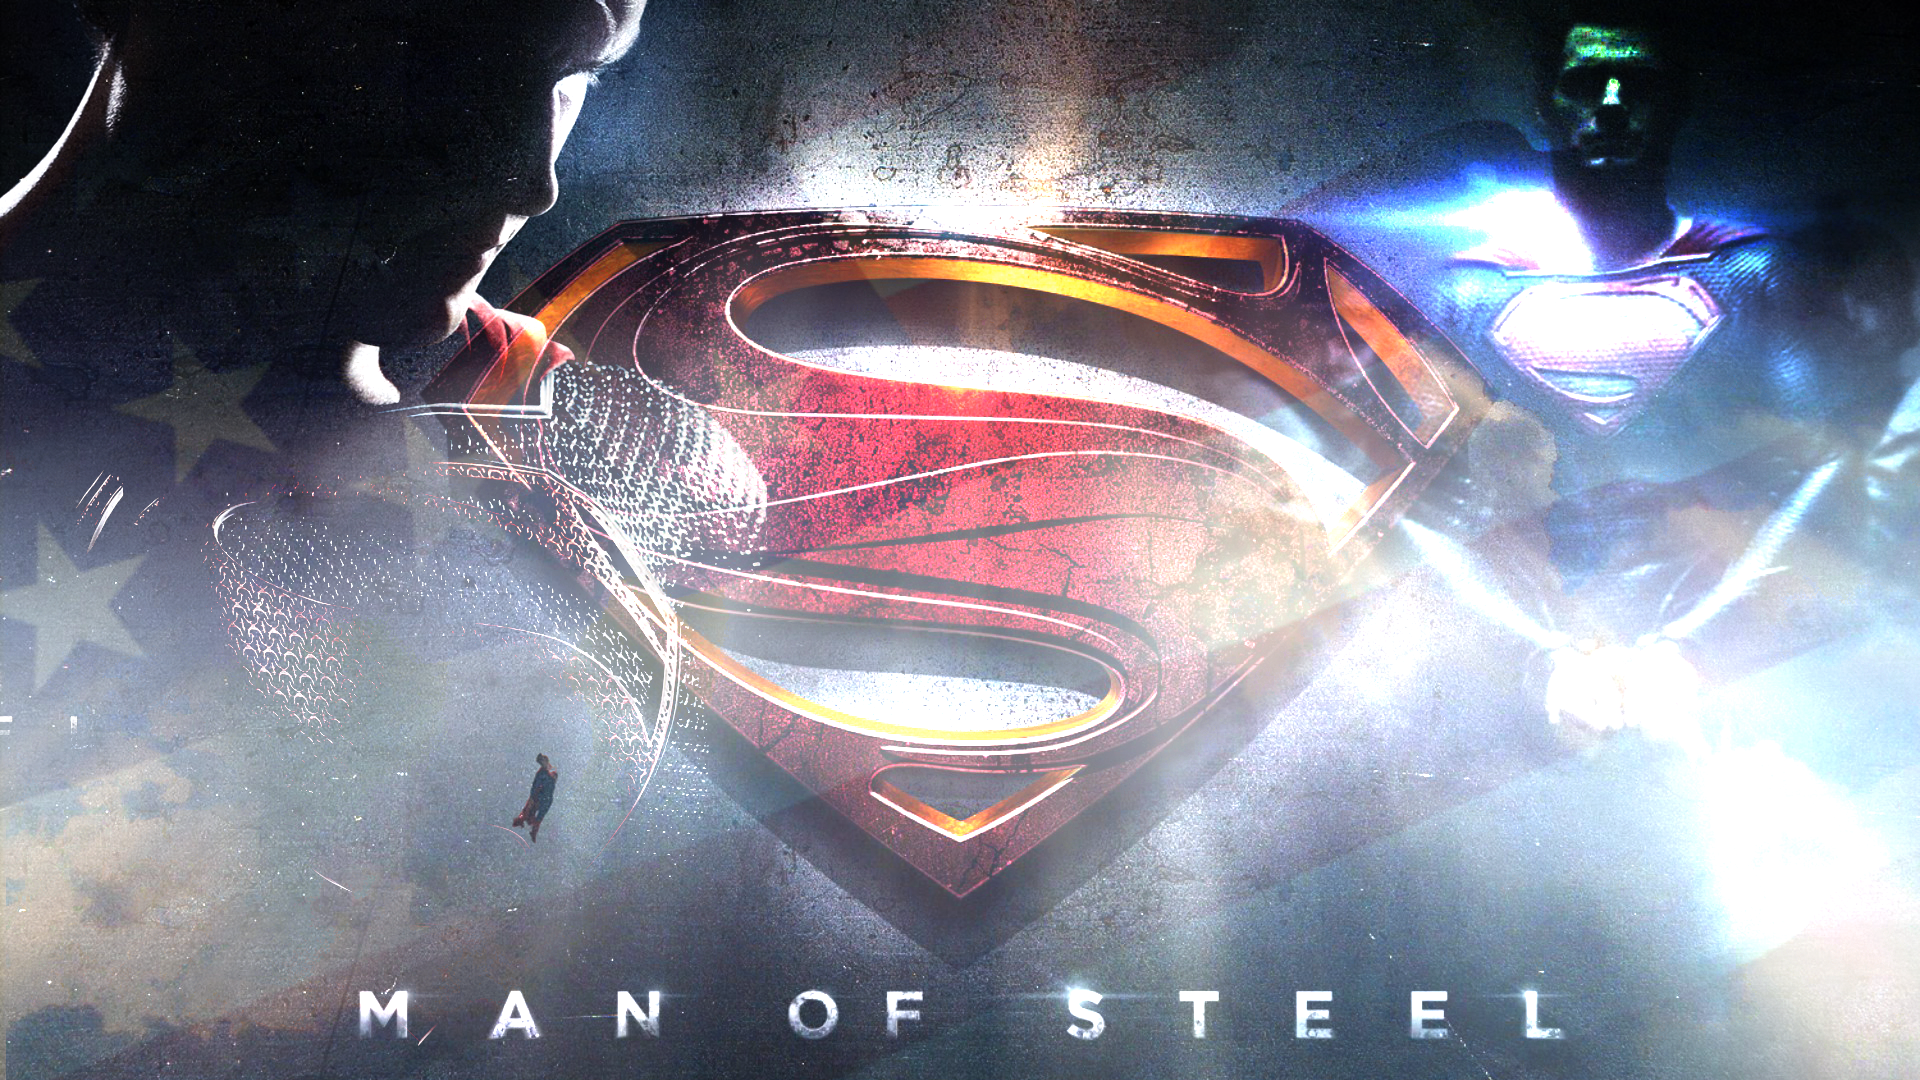 93 Man Of Steel HD Wallpapers Backgrounds Wallpaper Abyss